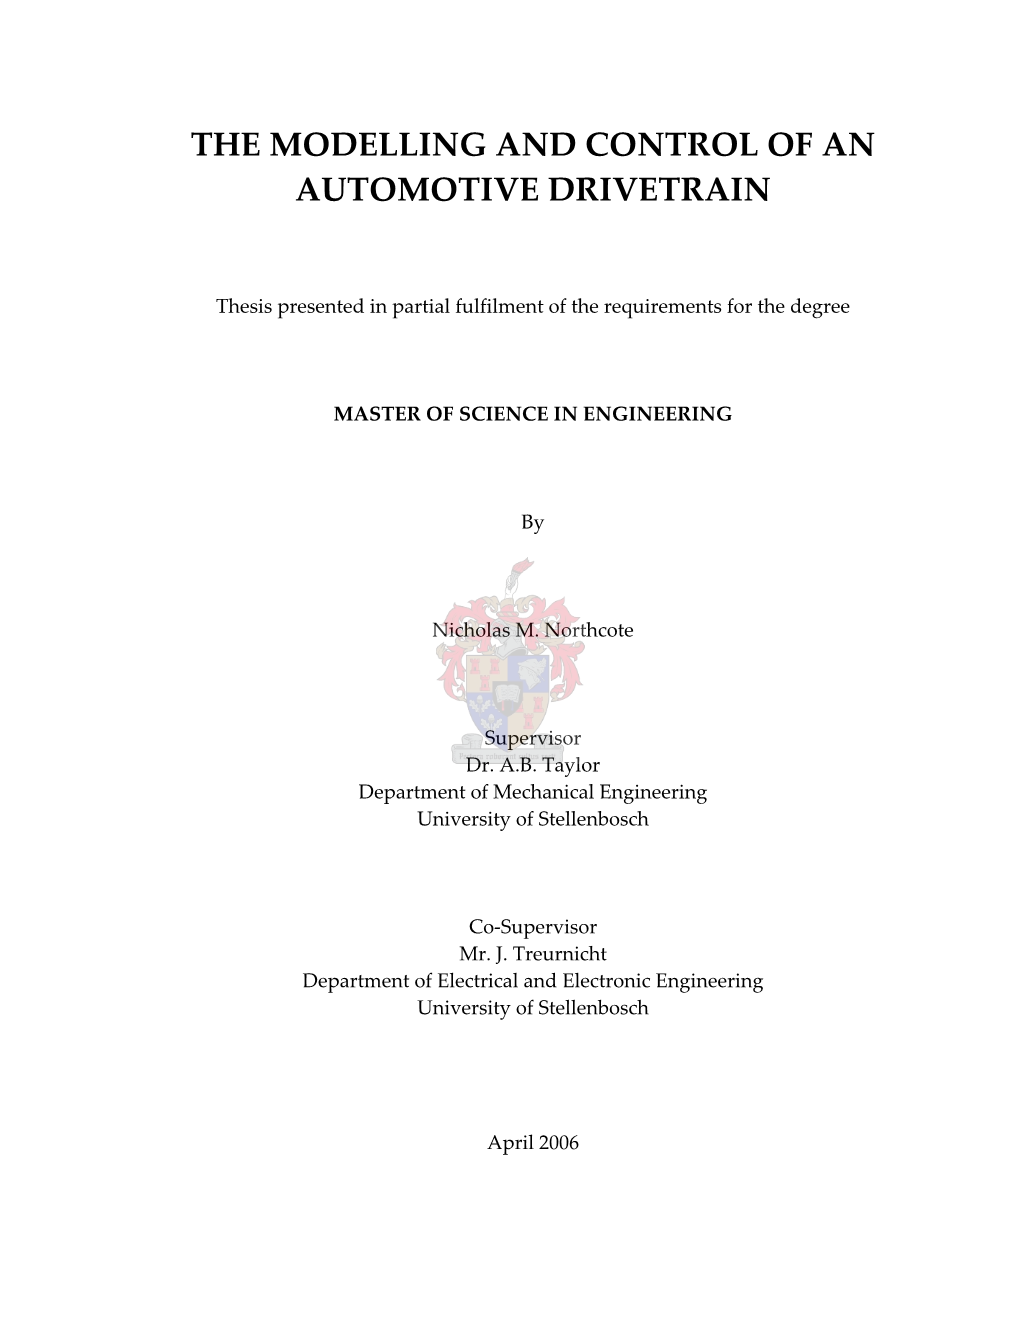 The Modeling and Control of an Automotive Drivetrain